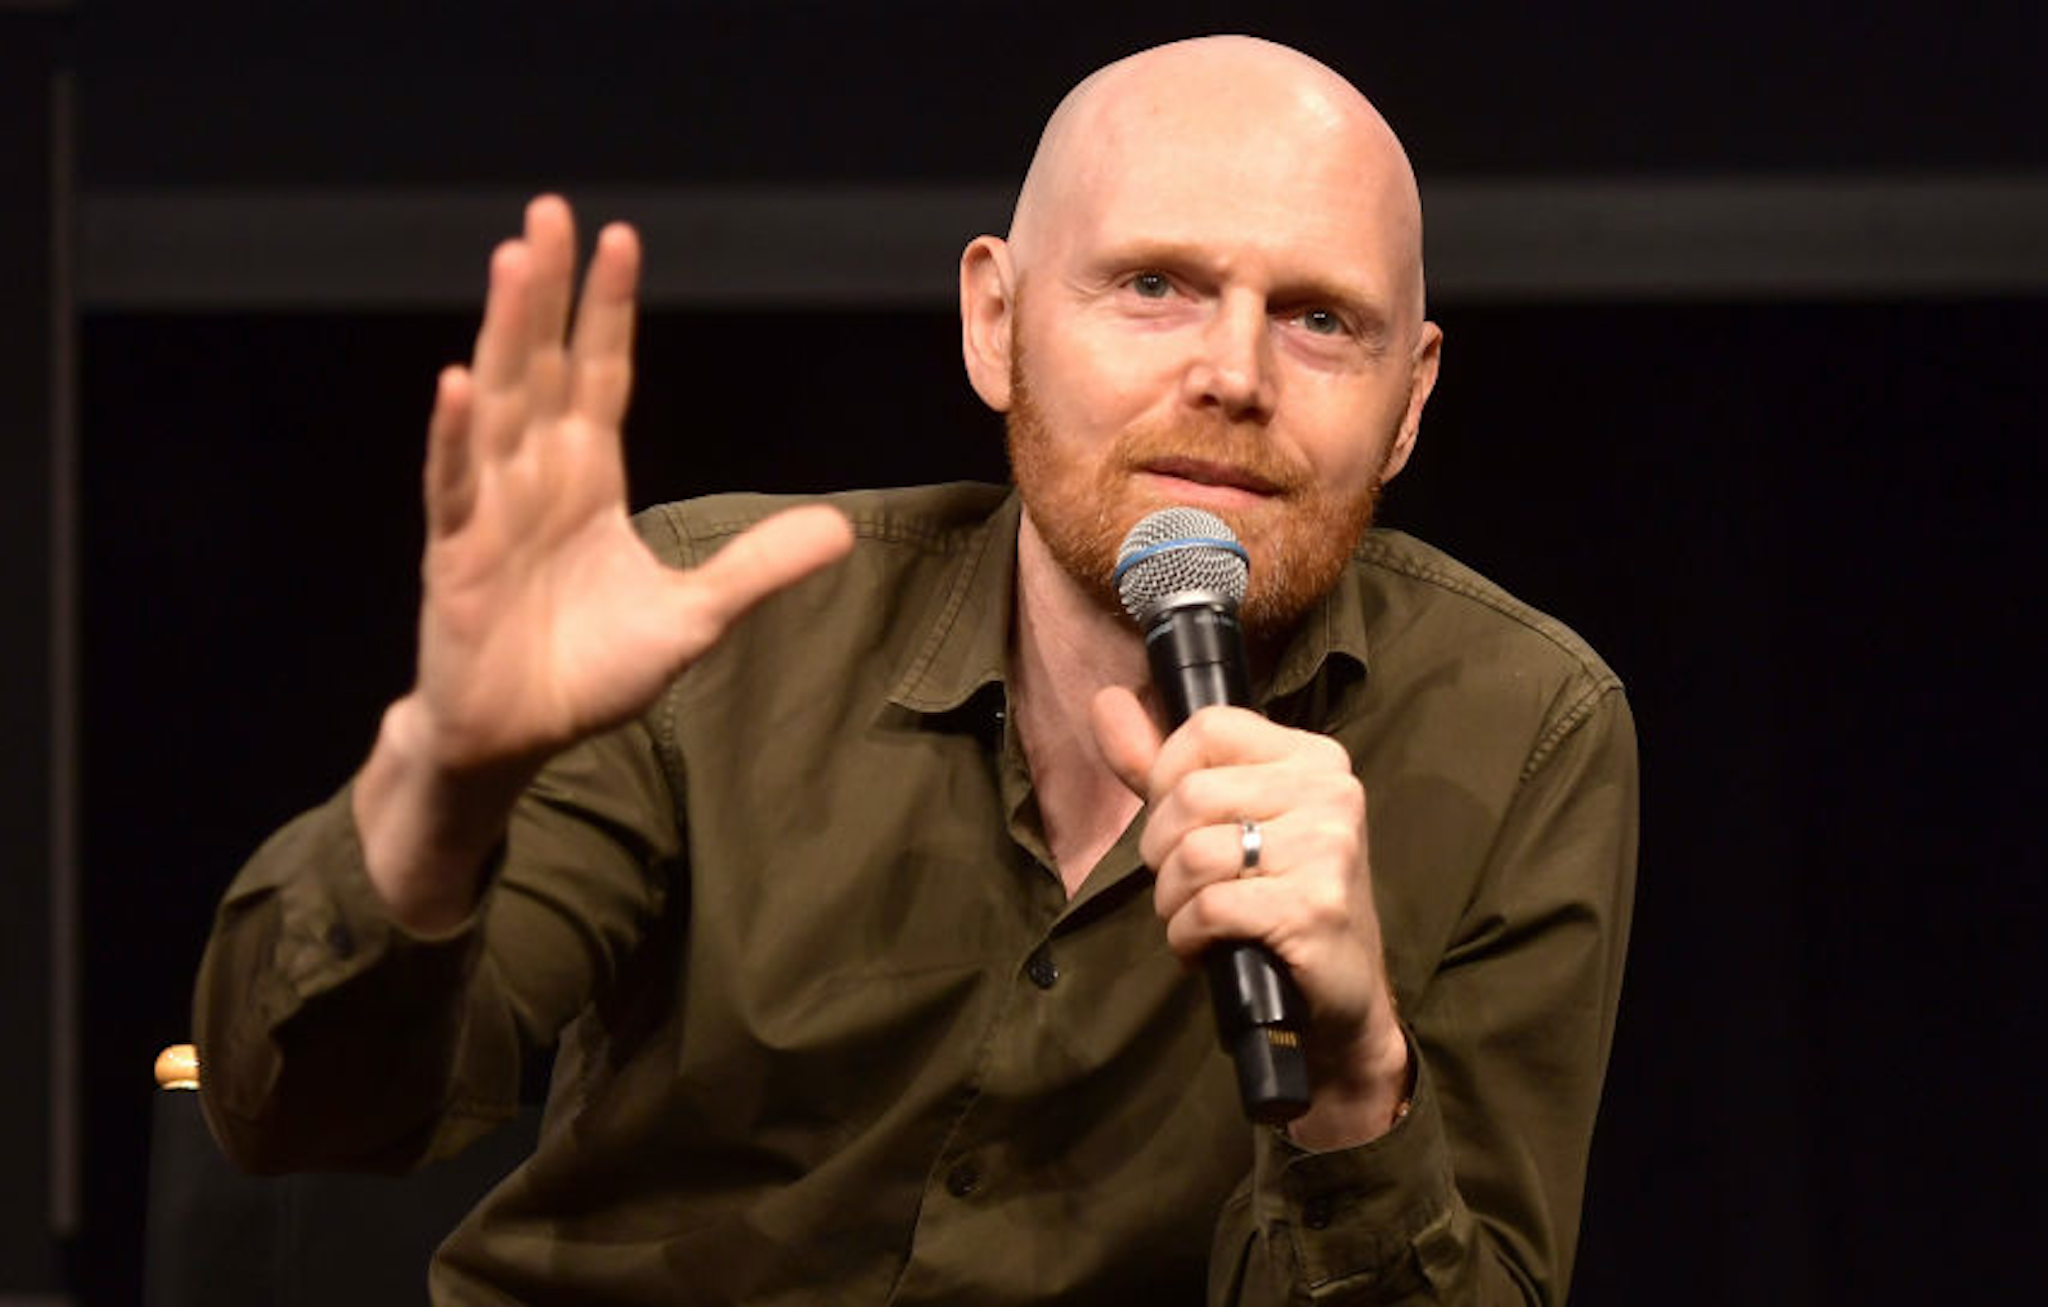 HOLLYWOOD, CALIFORNIA - APRIL 20: Bill Burr speaks onstage at the Netflix Adult Animation Q&A and Reception on April 20, 2019 in Hollywood, California.